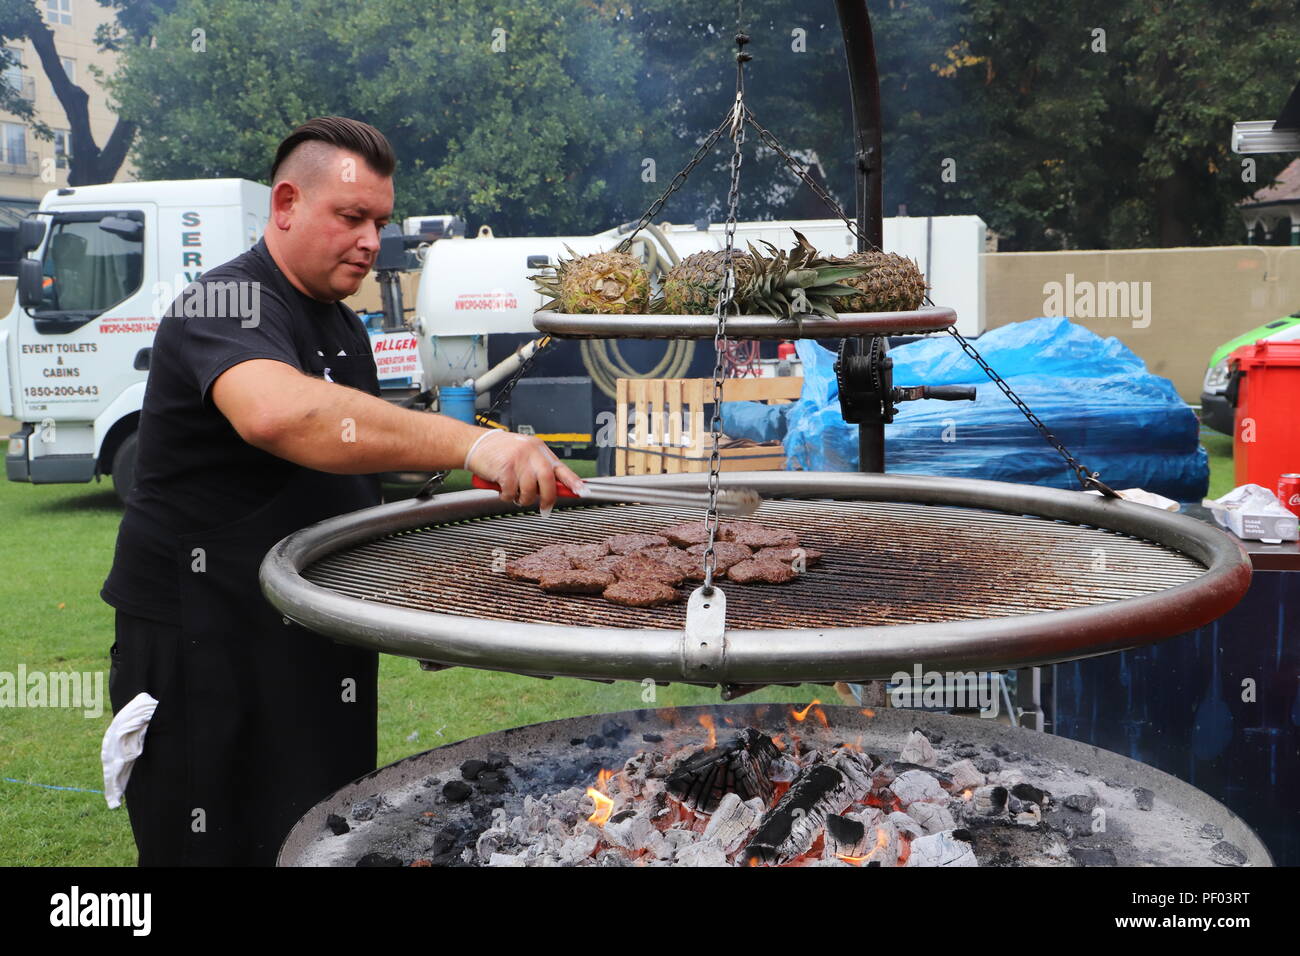 Dublin, Ireland. 18th Aug, 2018. A pitmaster prepares barbecued food at an  international BBQ festival in Dublin, Ireland, Aug. 17, 2018. An  international BBQ festival named The Big Grill opened here on